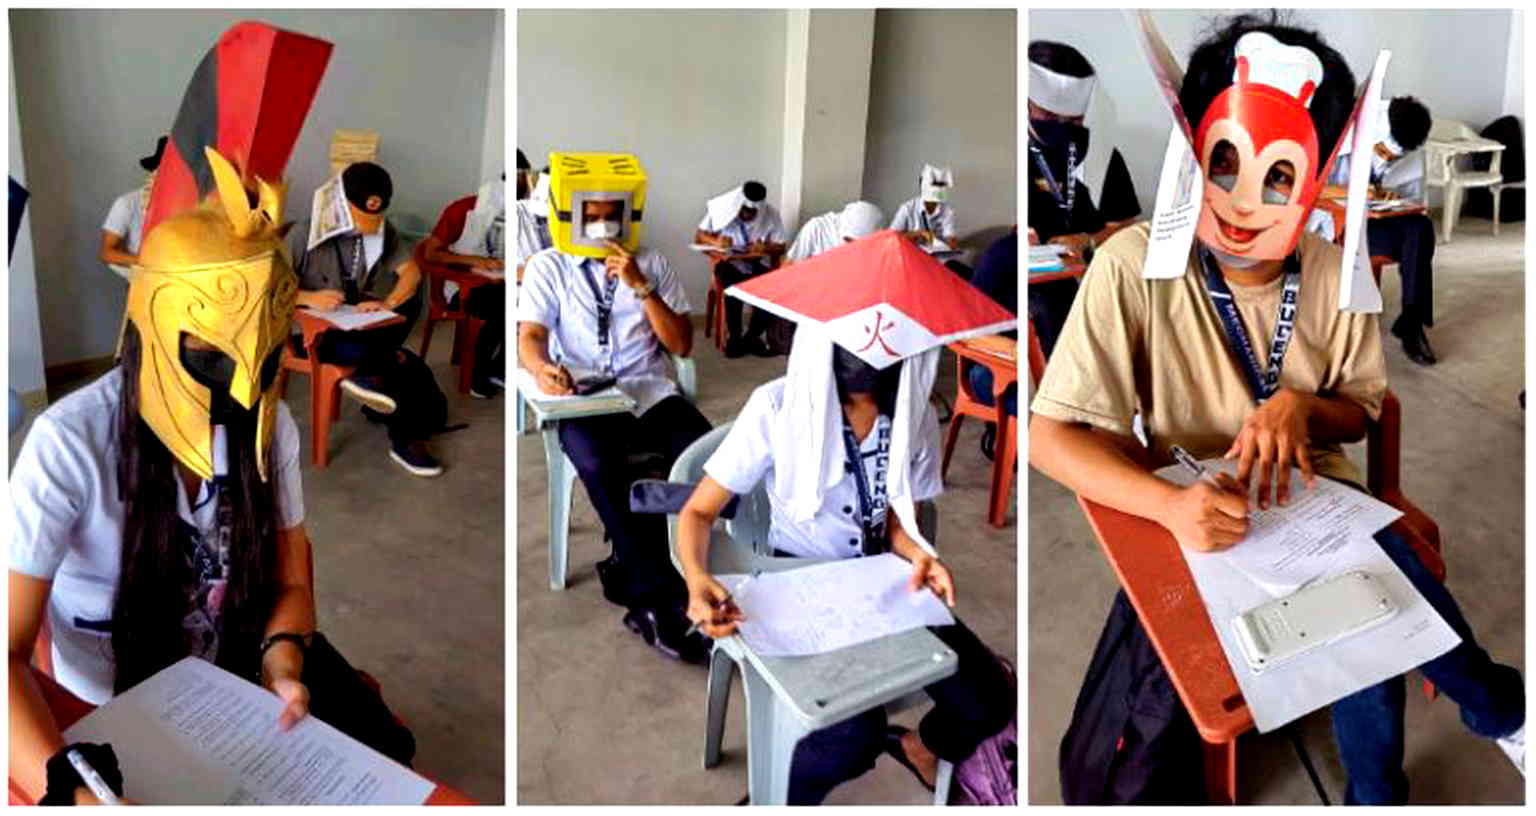 Students’ ‘anti-cheating hats’ during exams in the Philippines go viral